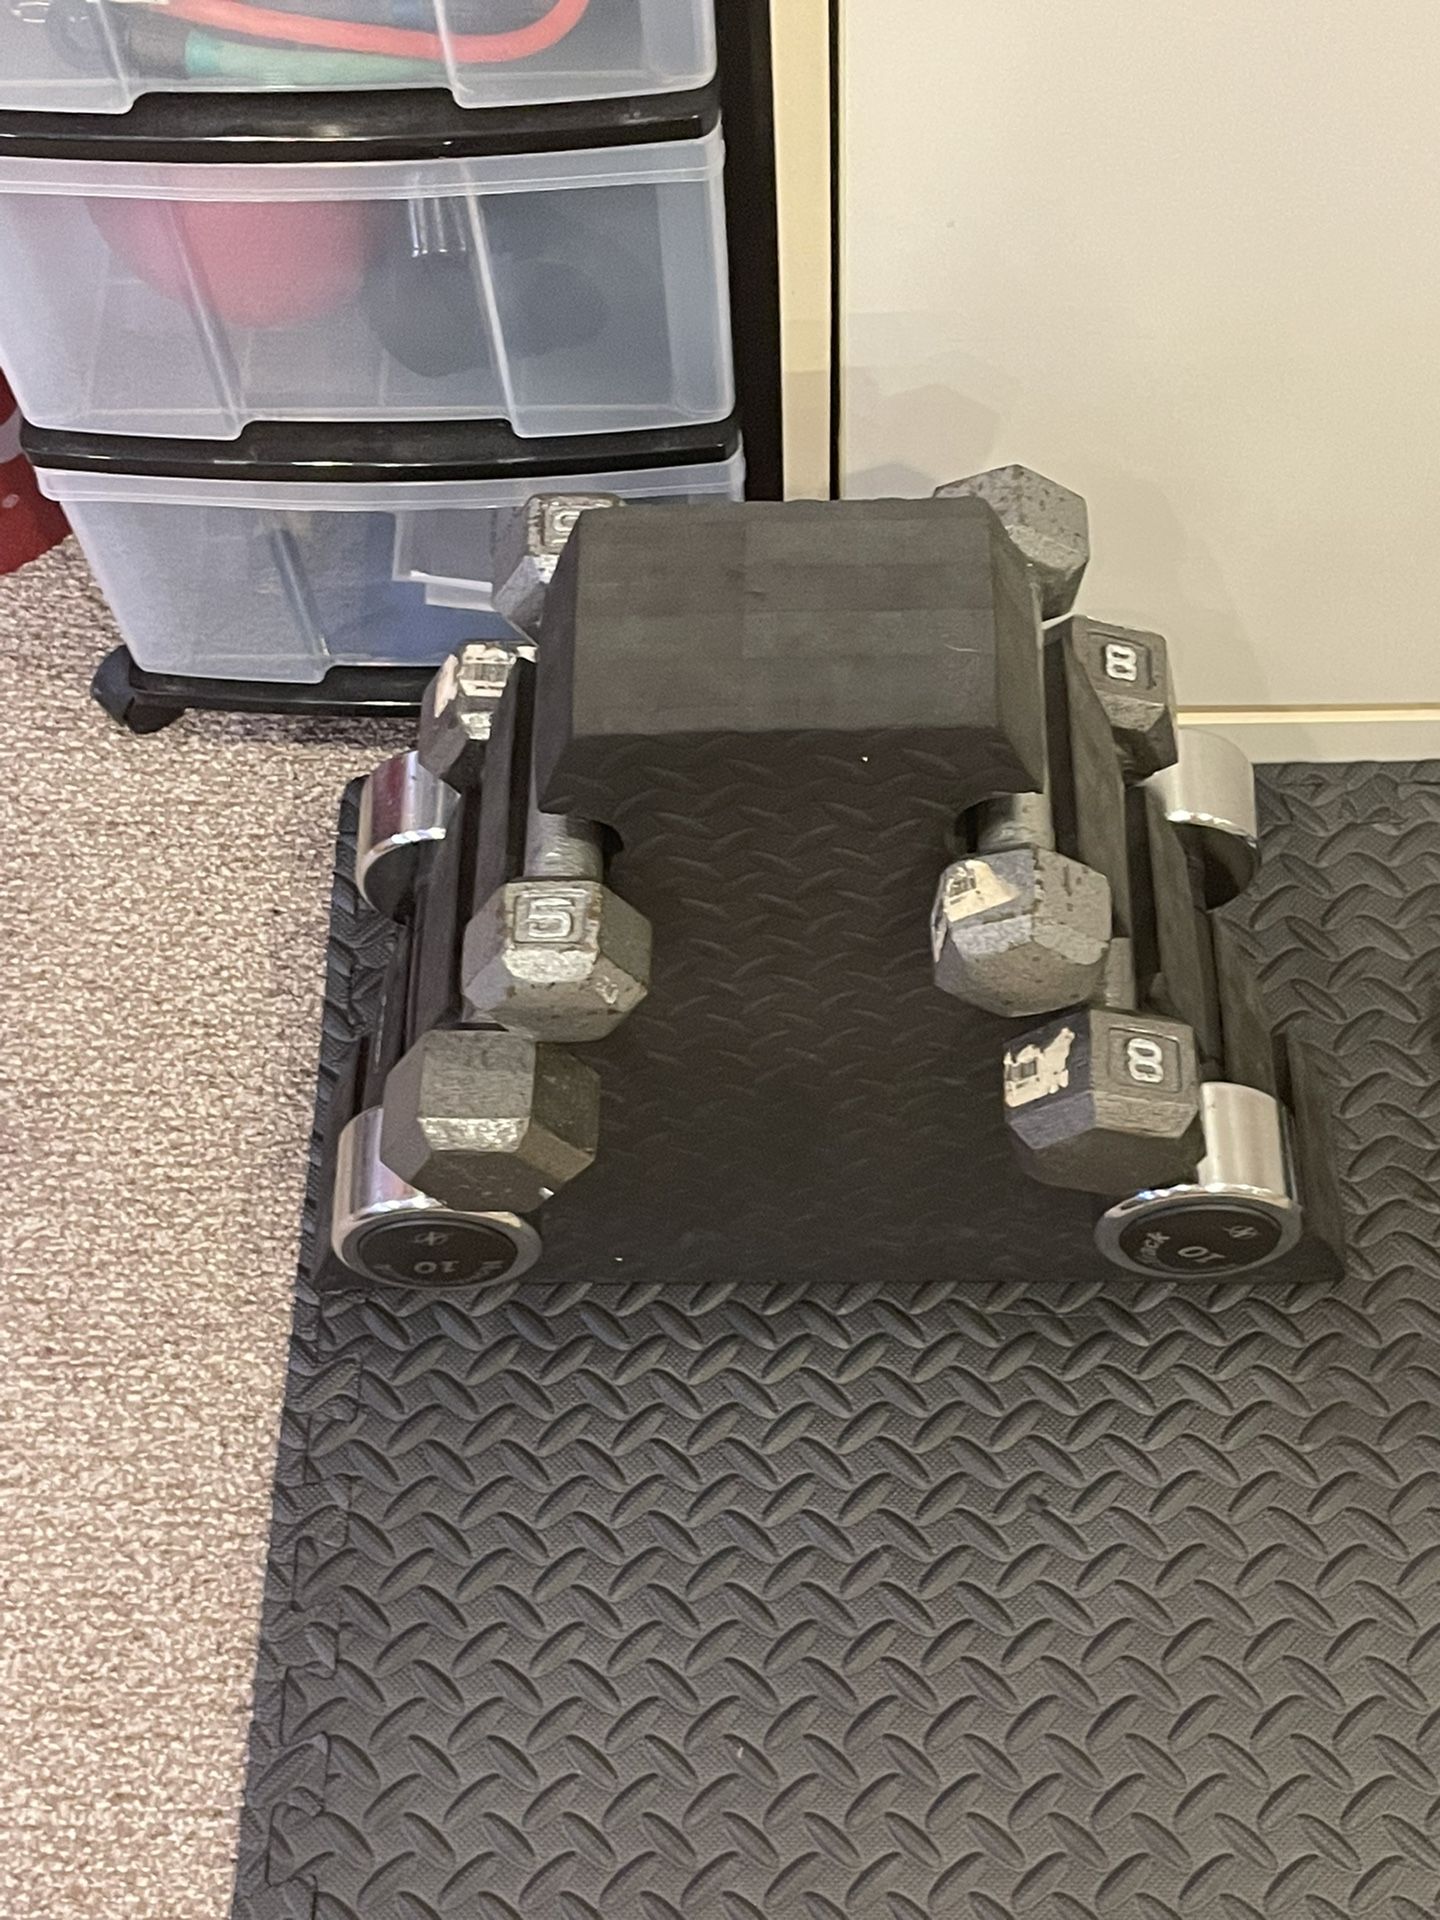 5,8,10lb Dumbbell Set With Stand 💪